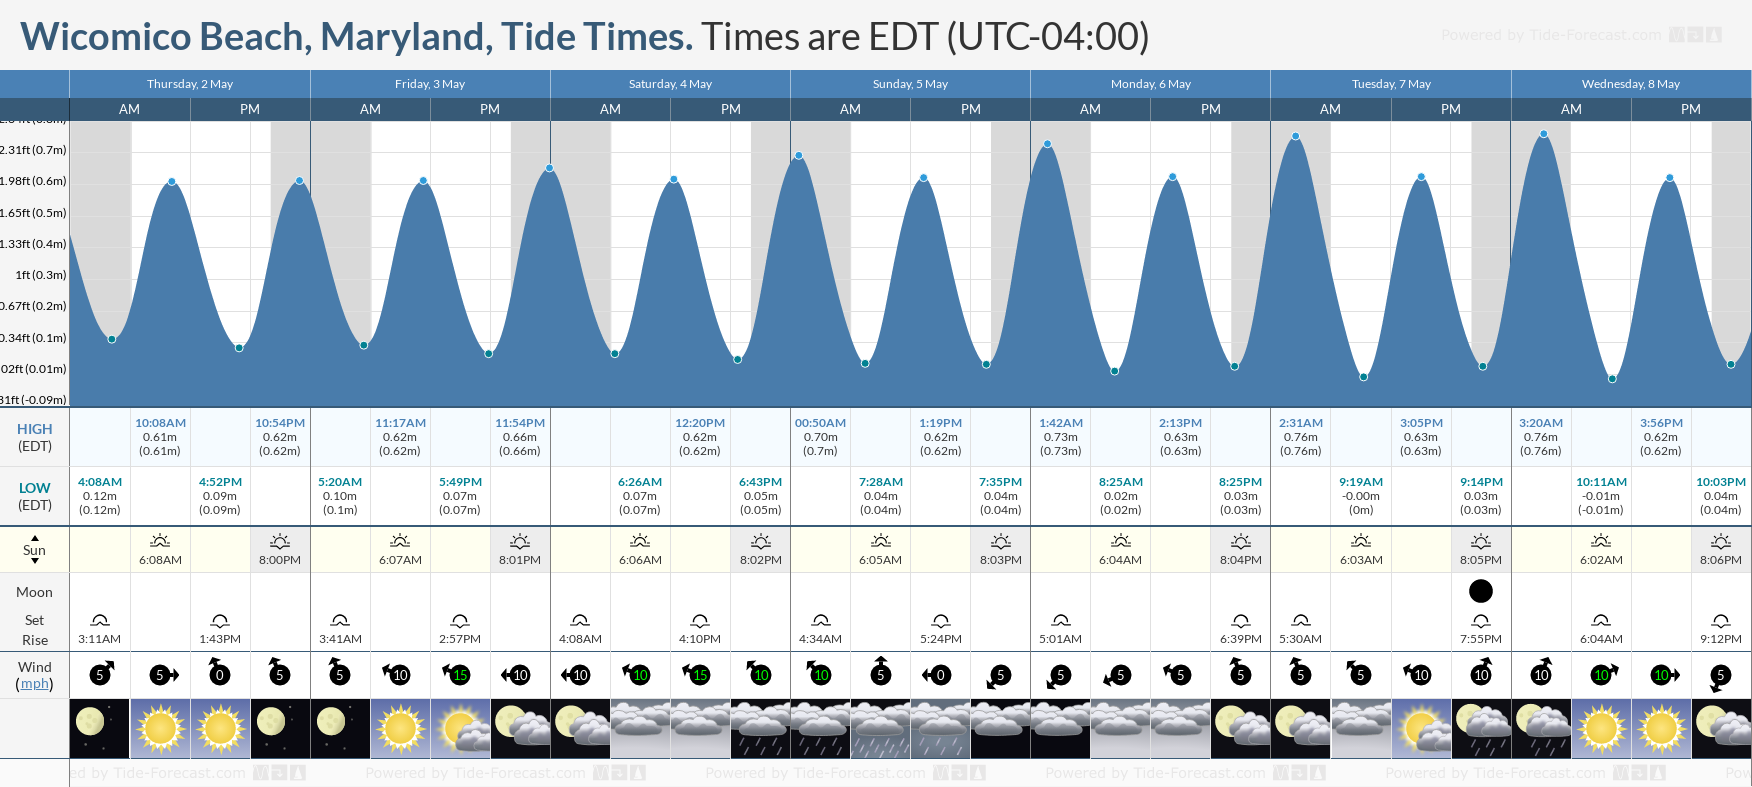 Wicomico Beach, Maryland Tide Chart including high and low tide times for the next 7 days